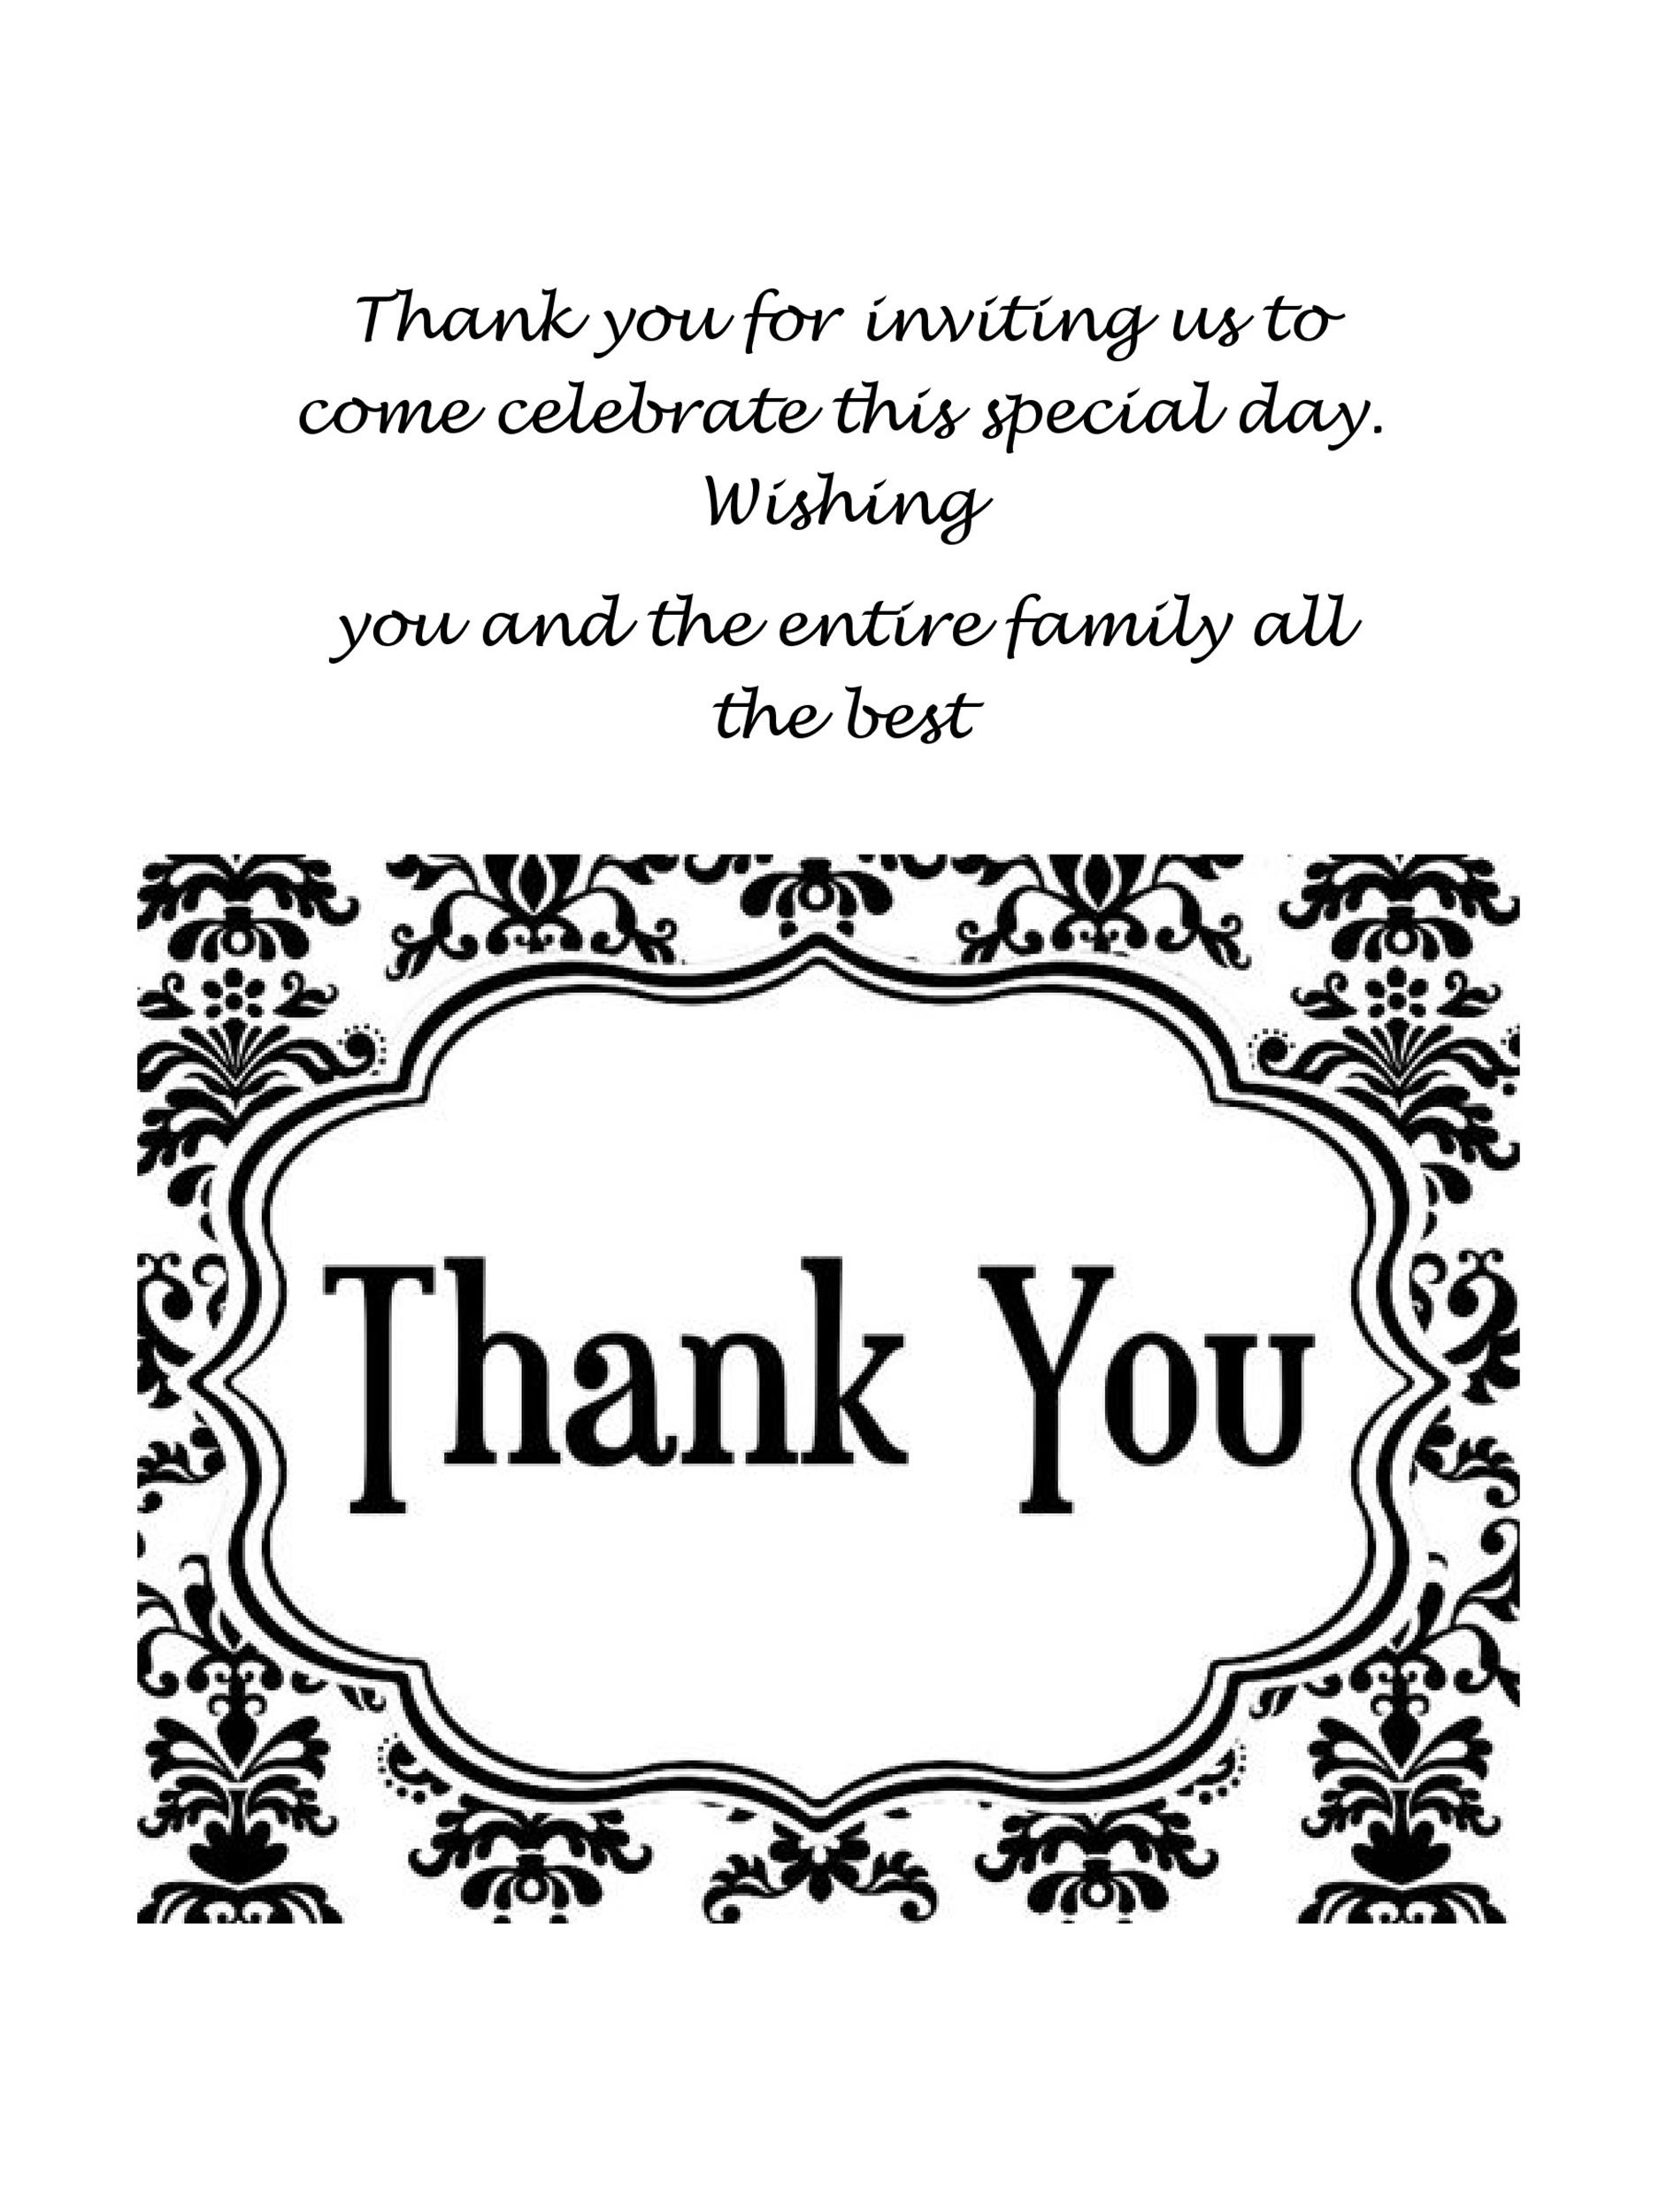 Thank You Card Templates 11 Free Word Excel PDF Formats Samples 